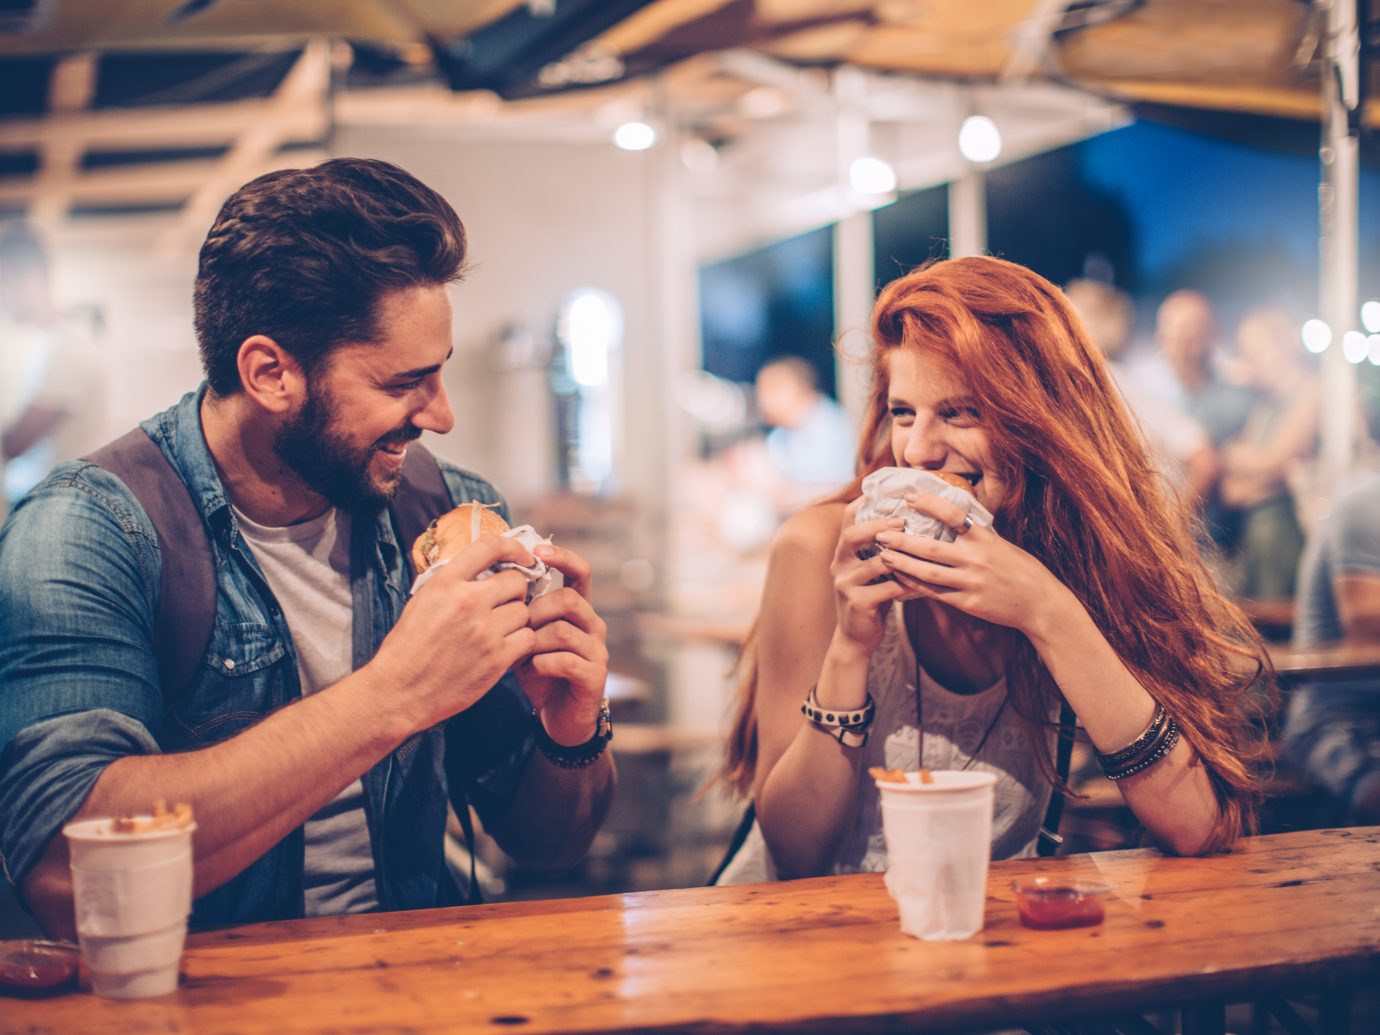 A young couple having snack and drink at an outdoors music festival. Eating burgers with fries and drinking beer.